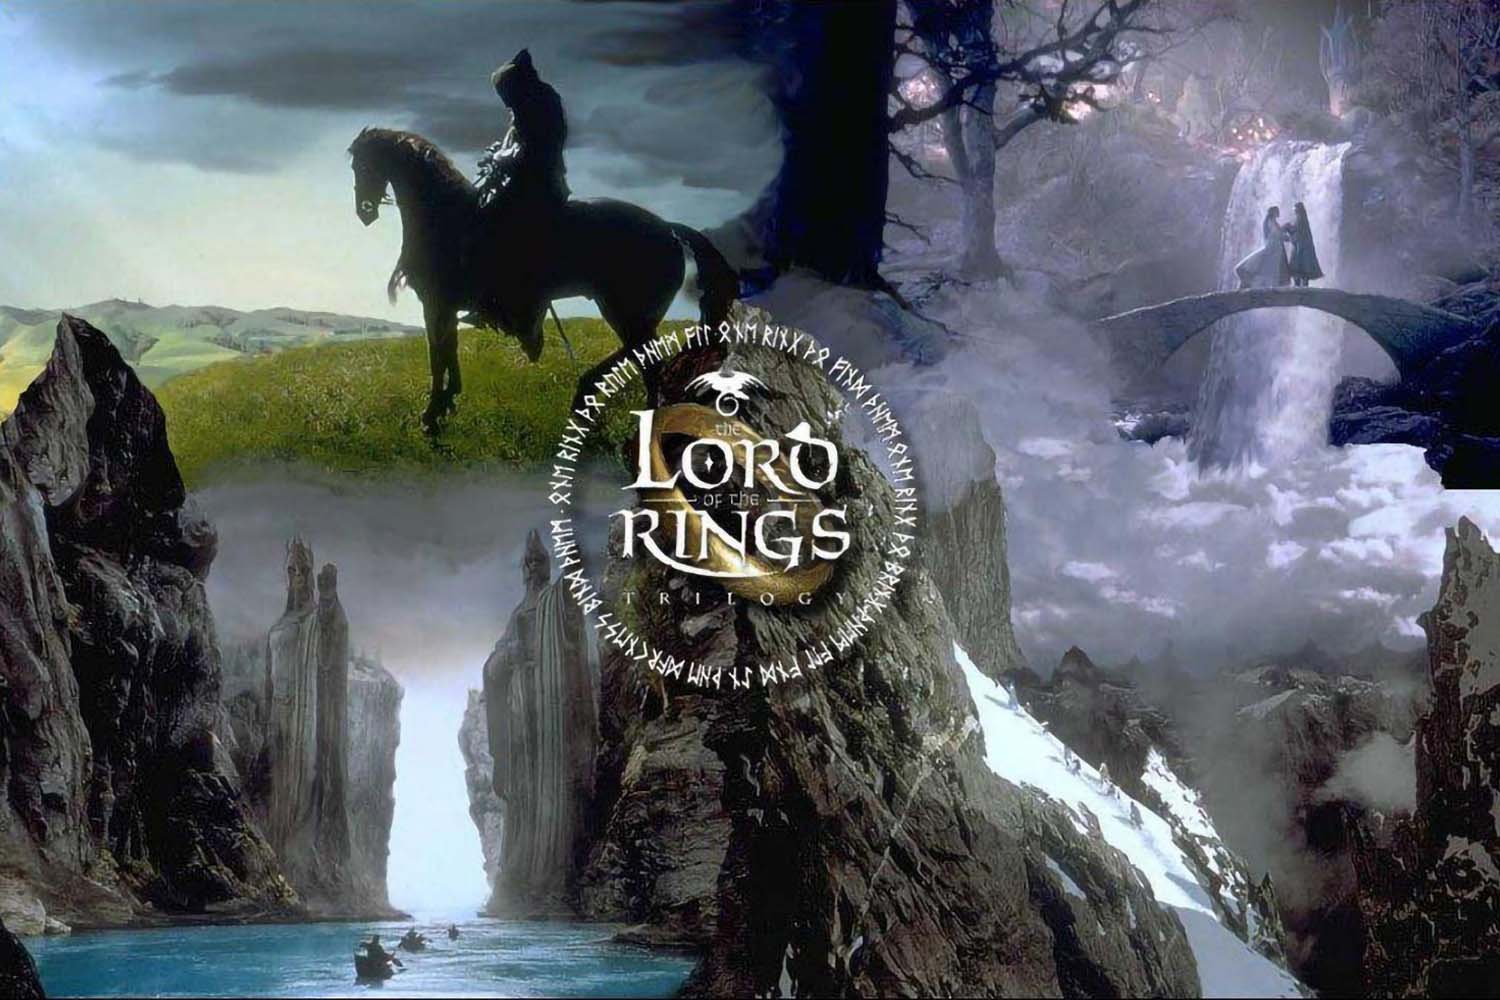 Countdown to the Lord of the Rings by Ted Tschopp